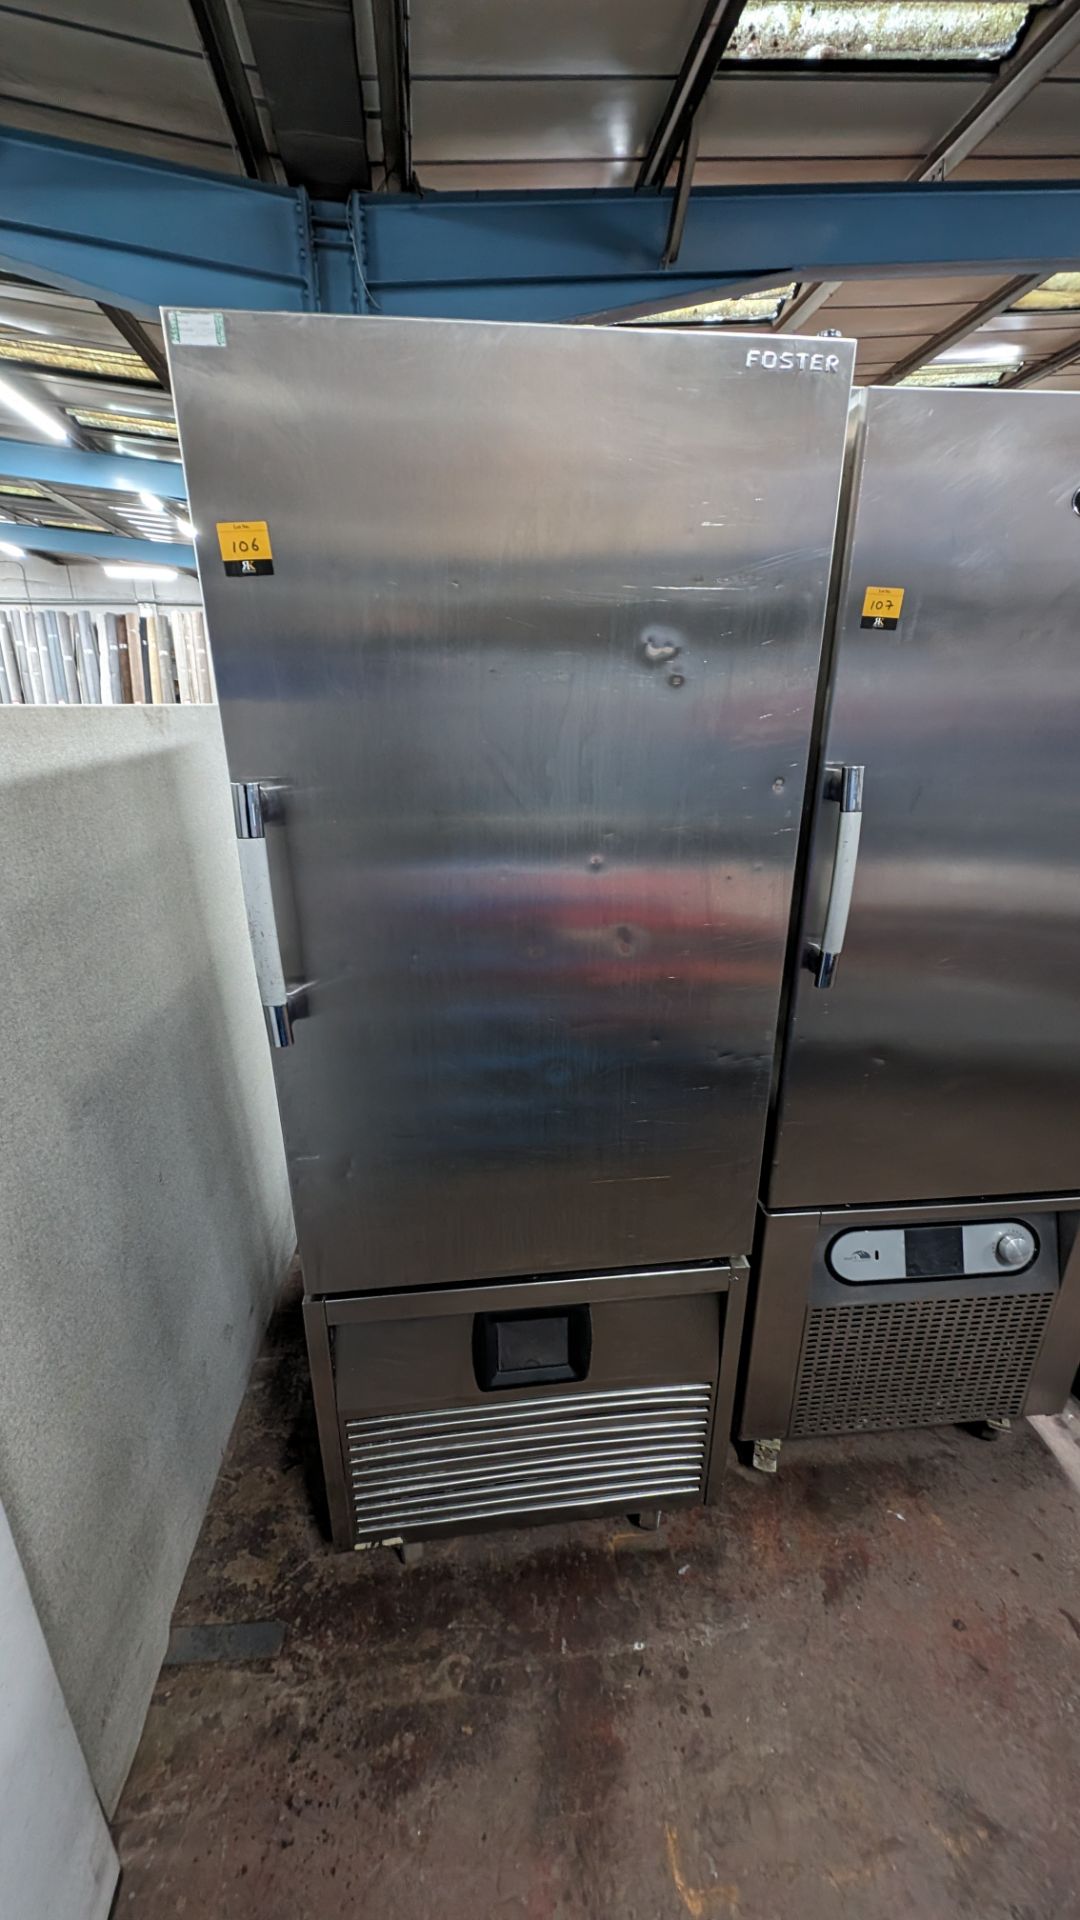 Foster stainless steel floor standing mobile blast chiller model BCT51, with touchscreen display to - Image 3 of 7